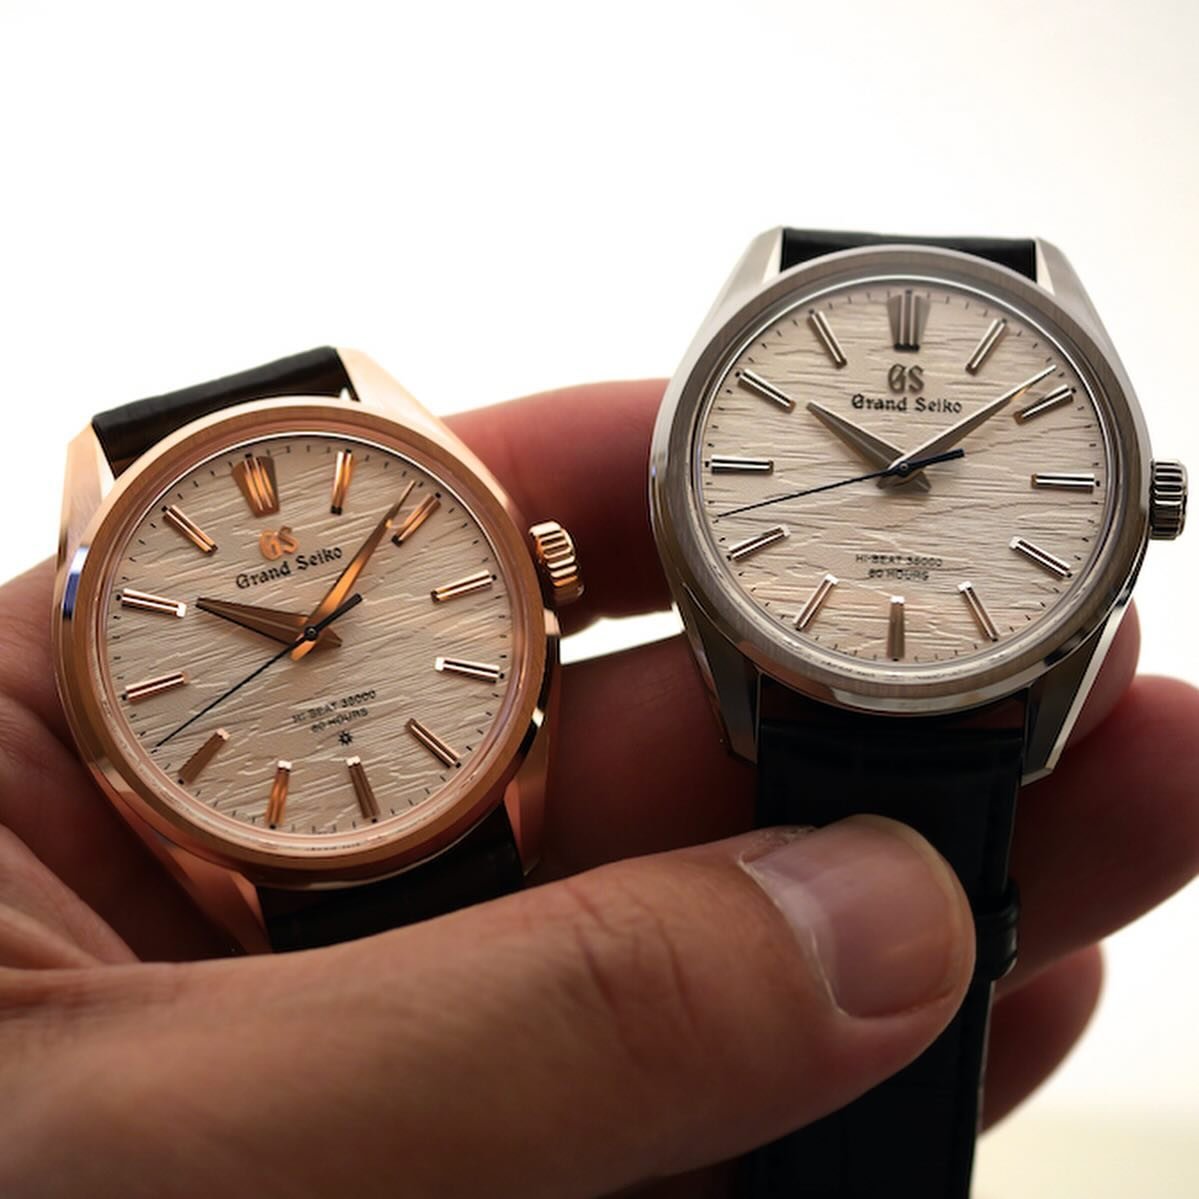 The new @grandseikoofficial Hi-Beat &lsquo;Birch Bark&rsquo; is powered by a new hi-beat manual wound movement and it comes in Grand Seiko&rsquo;s Brilliant Hard Titanium reference SLGW003 &mdash;regular production&mdash; or in 18K rose gold referenc